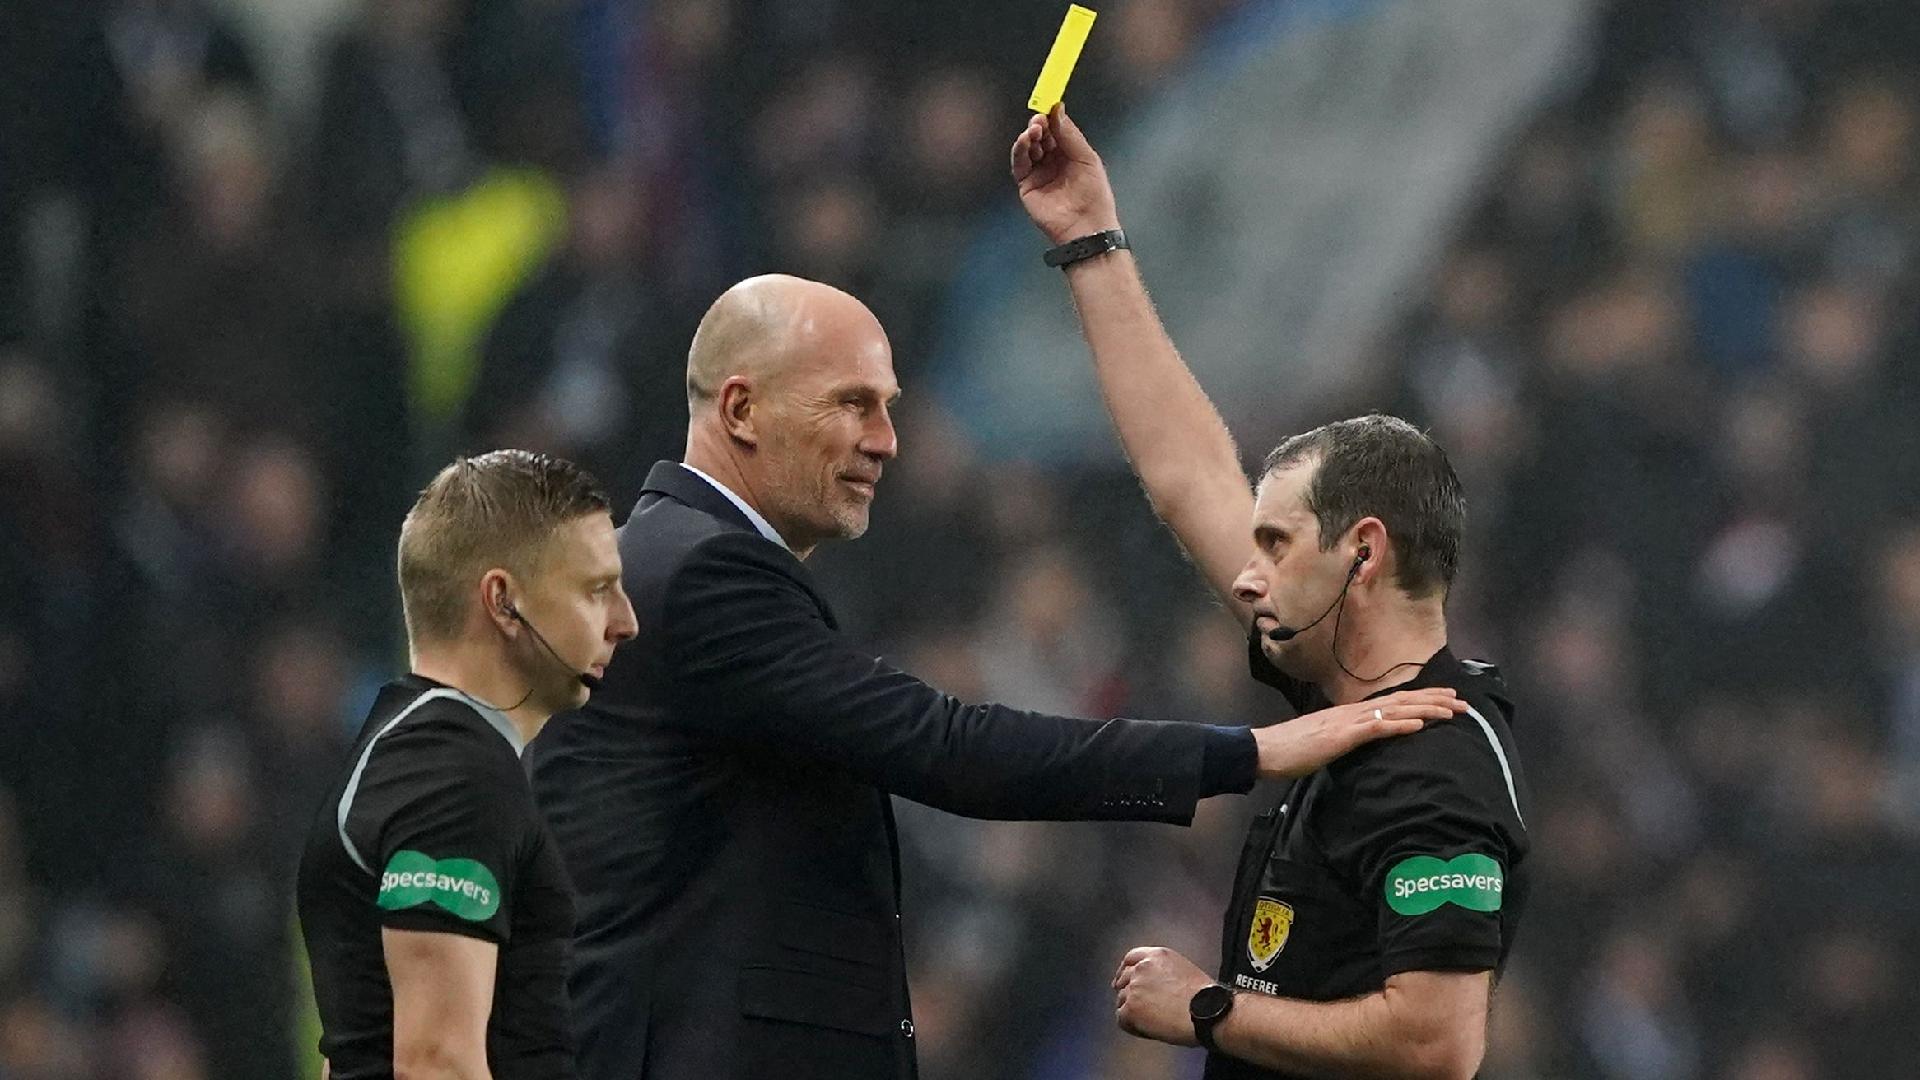 Rangers boss Philippe Clement wants regular meetings with referees in Scotland